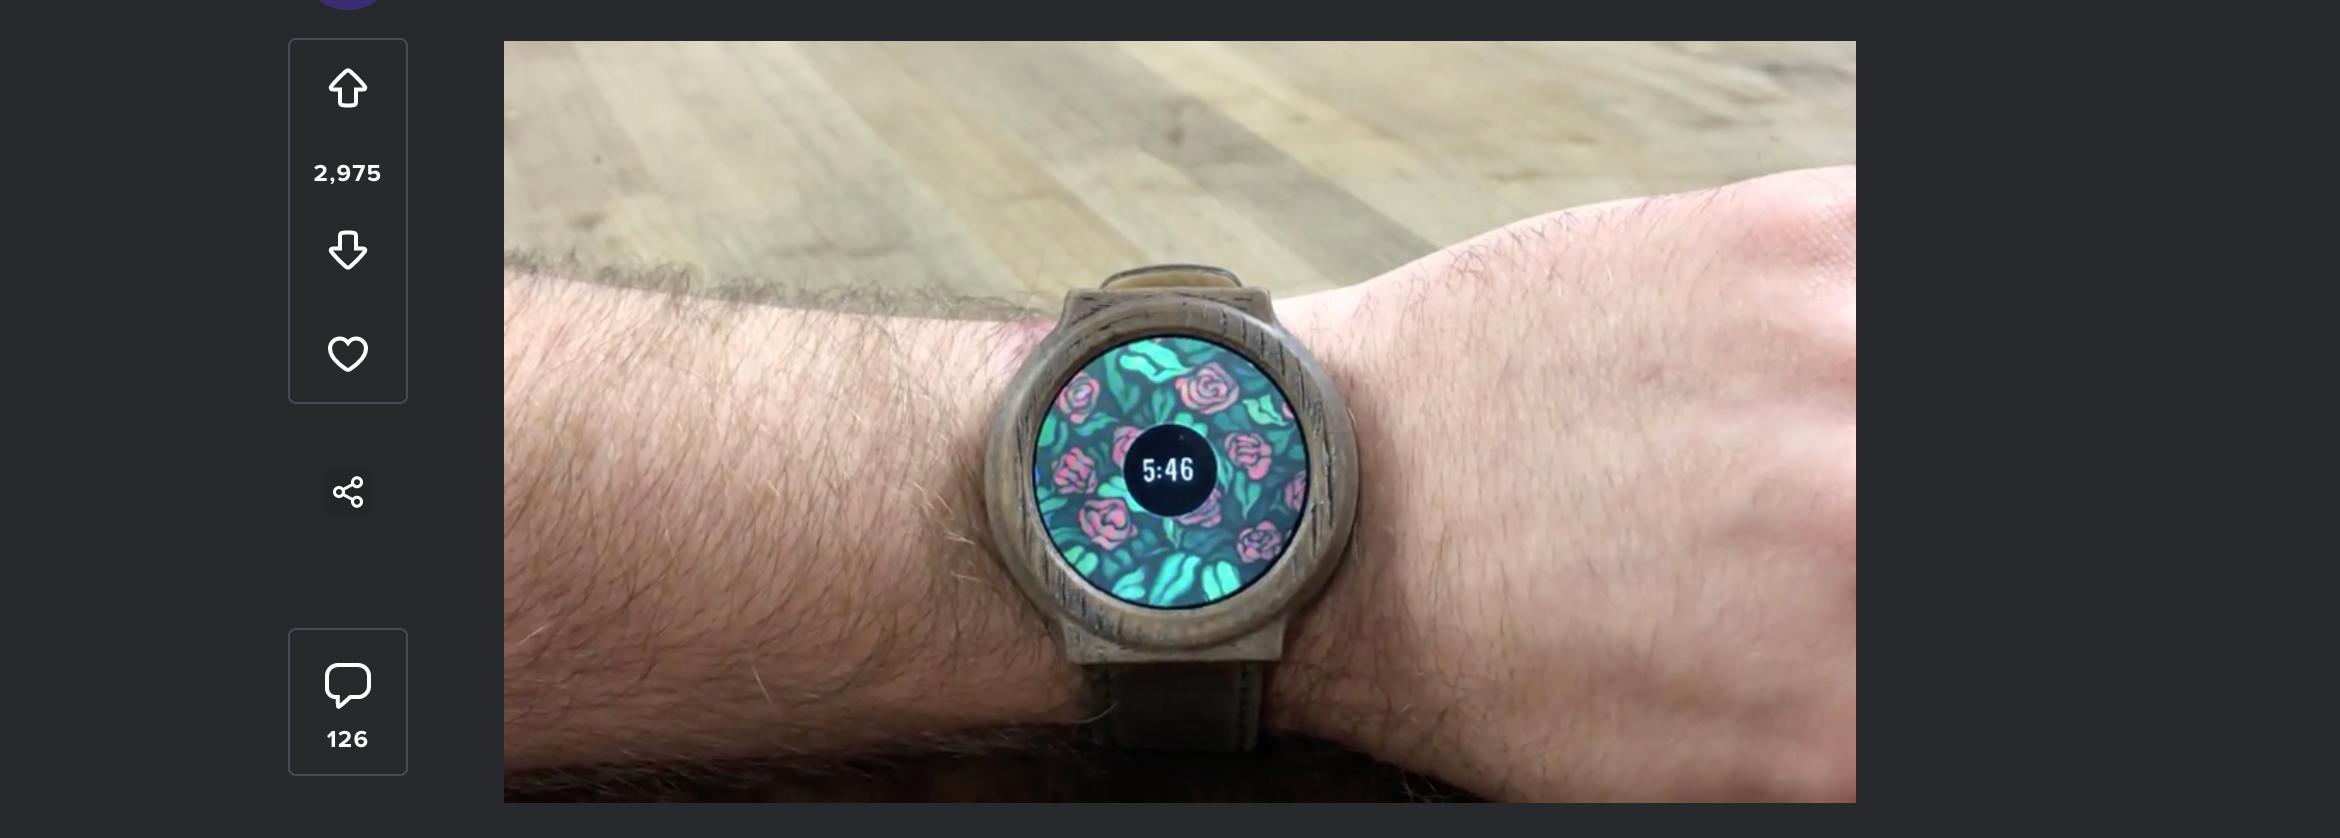 A screenshot showing a photo of a smartwatch on a persons wrist